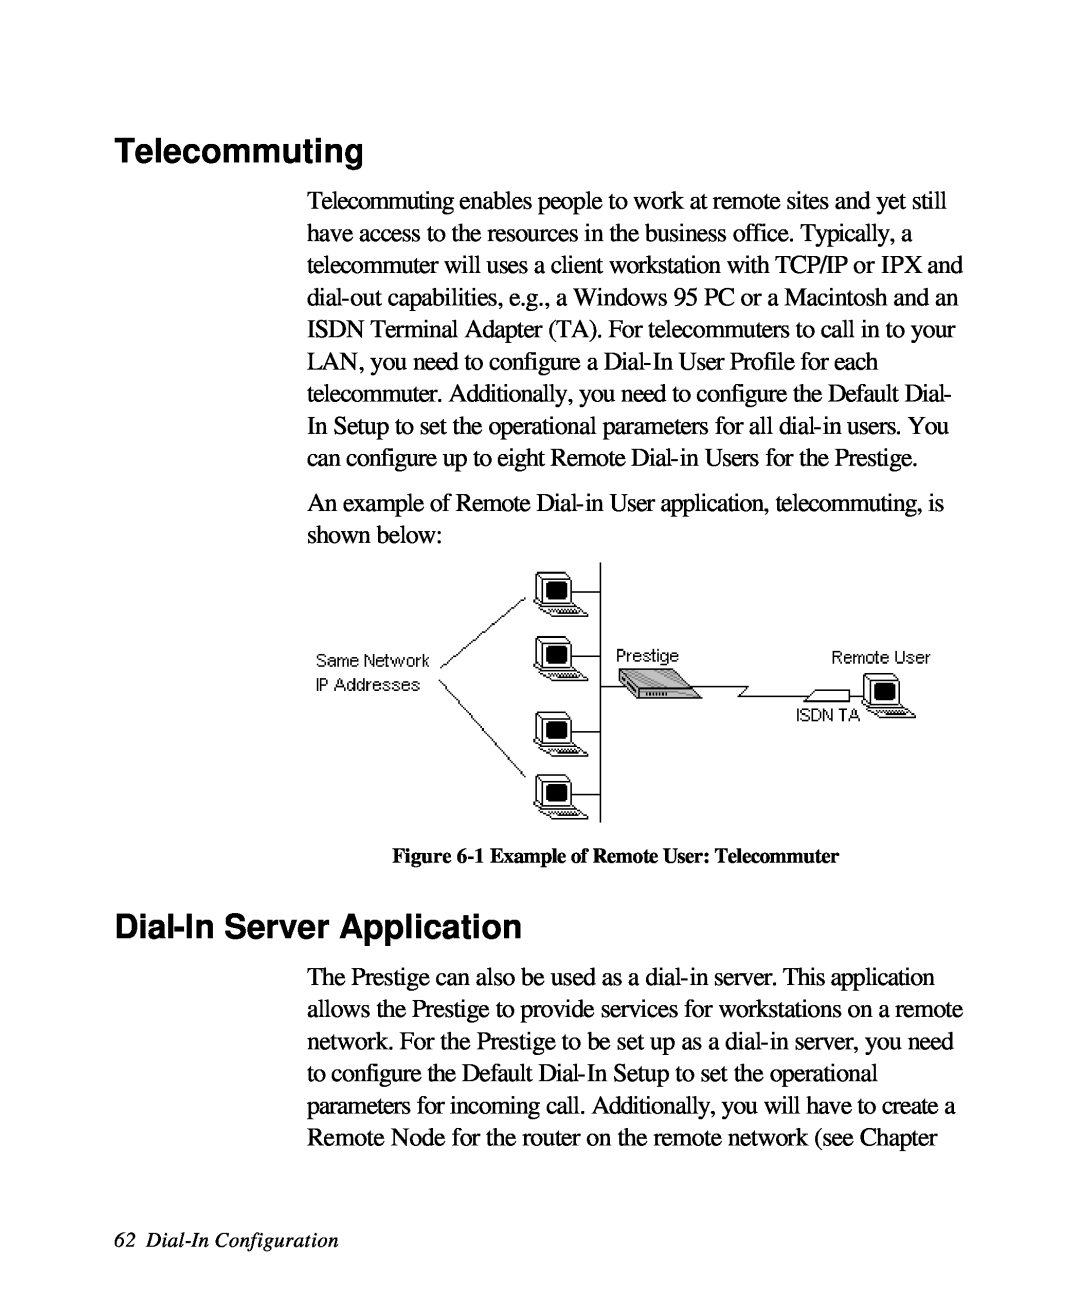 ZyXEL Communications 28641 user manual Telecommuting, Dial-In Server Application, 1 Example of Remote User Telecommuter 